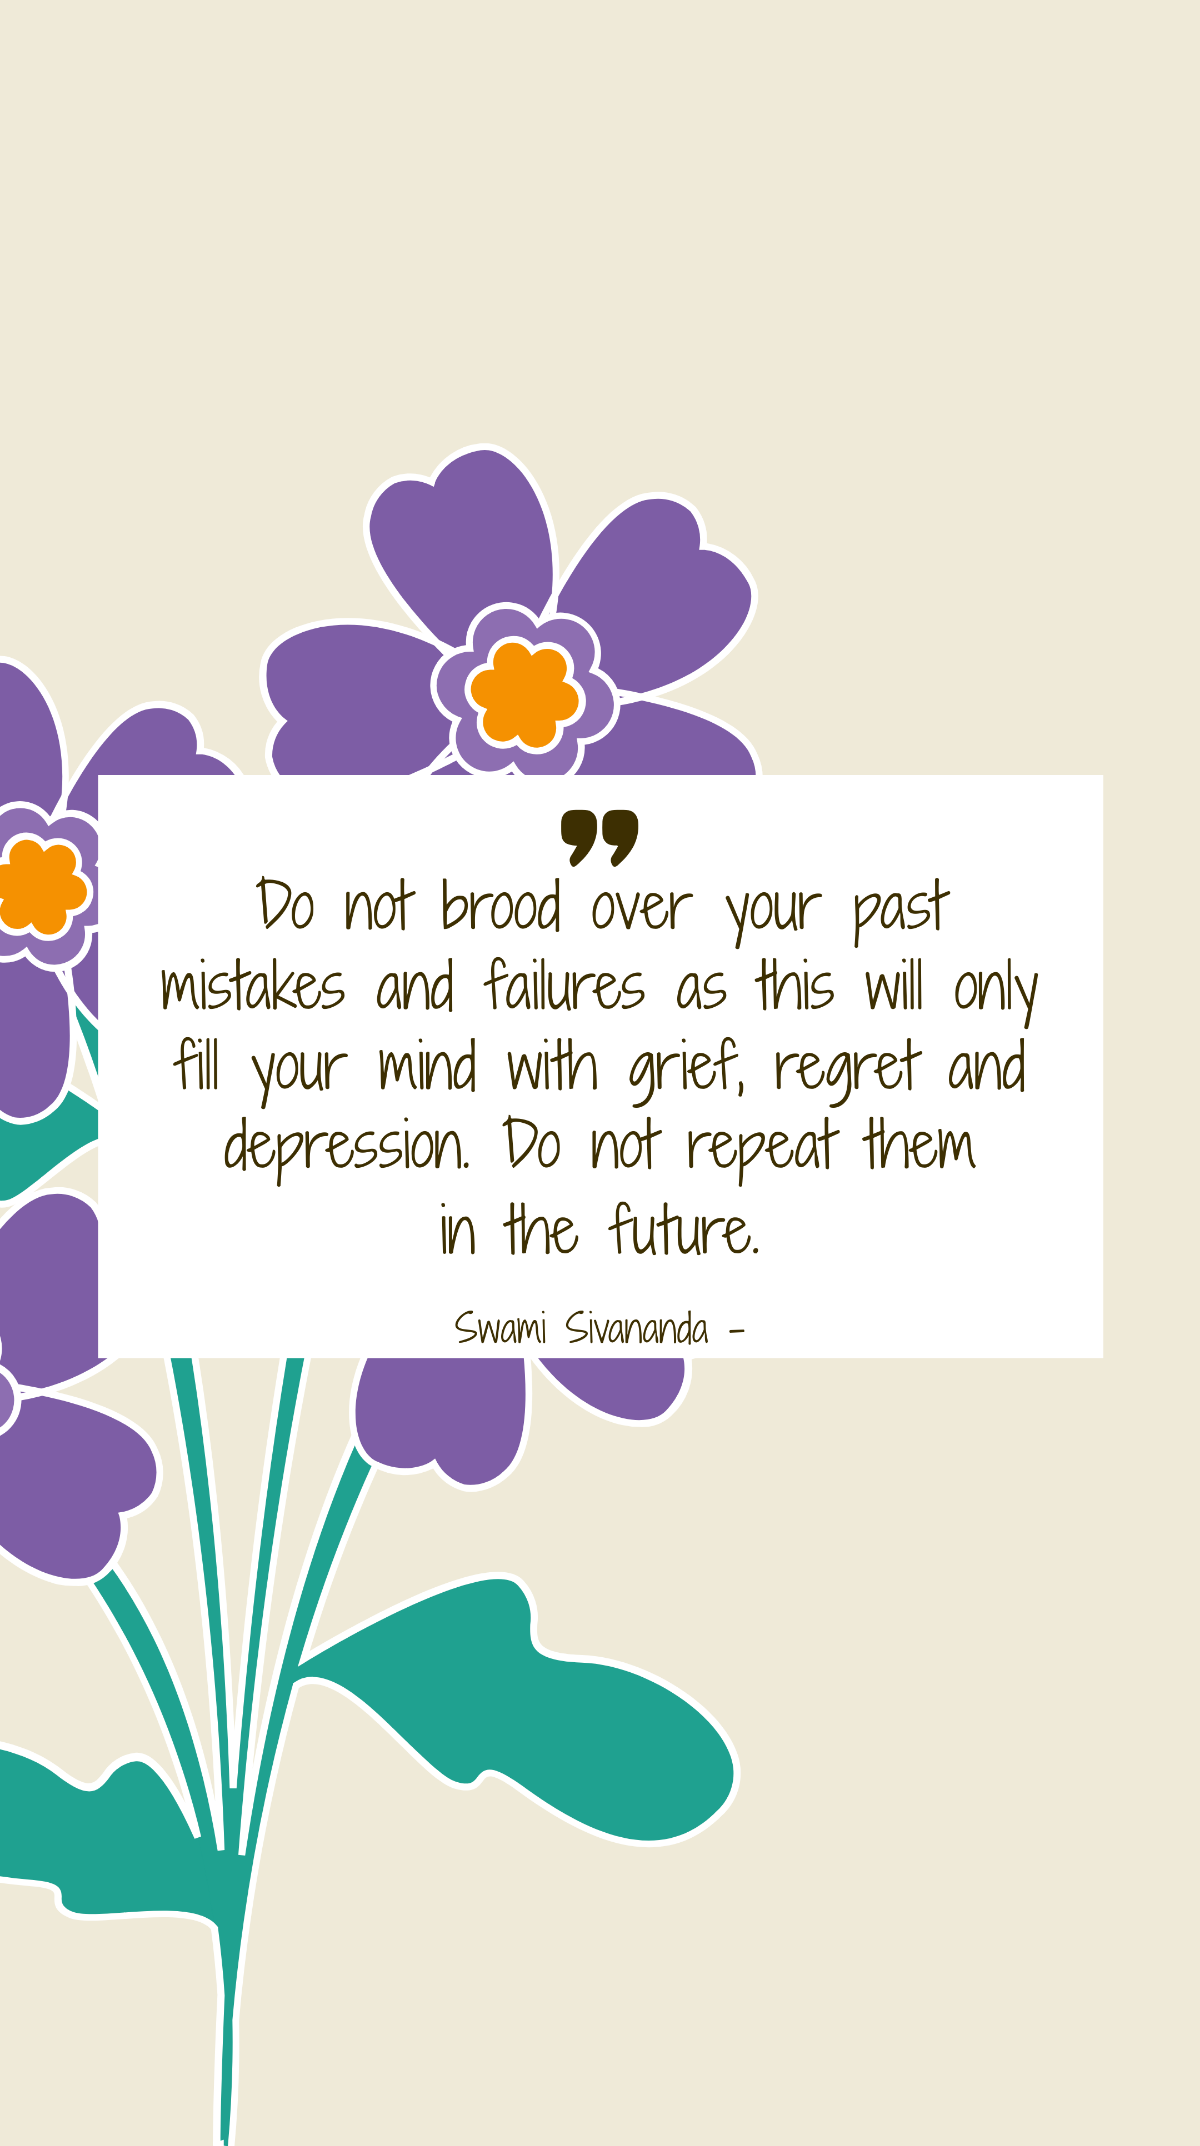 Swami Sivananda - Do not brood over your past mistakes and failures as this will only fill your mind with grief, regret and depression. Do not repeat them in the future. Template